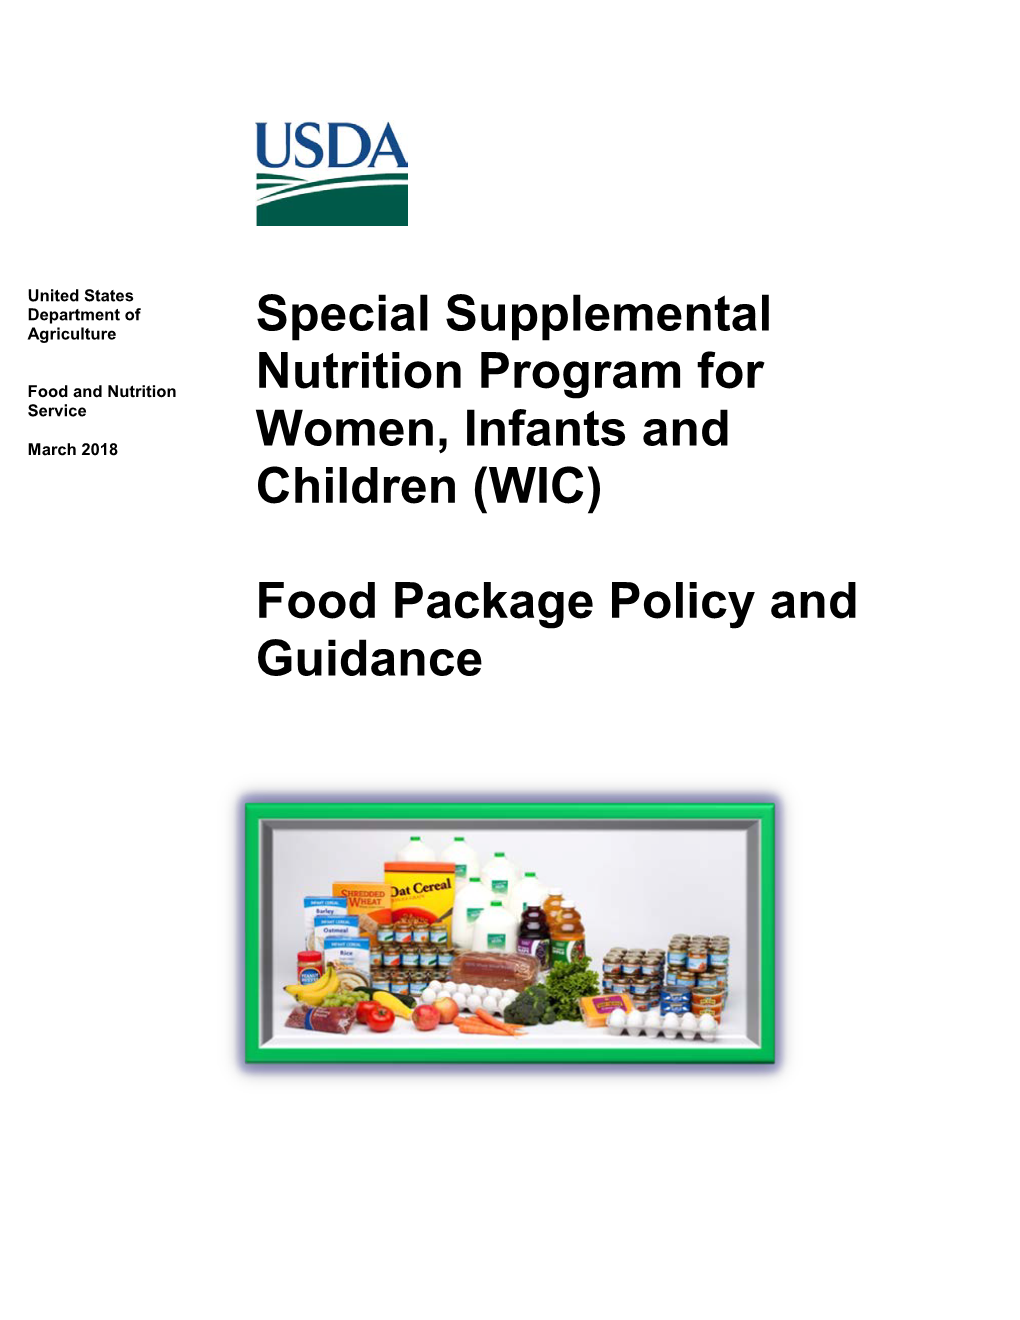 USDA WIC Food Package Policy and Guidance